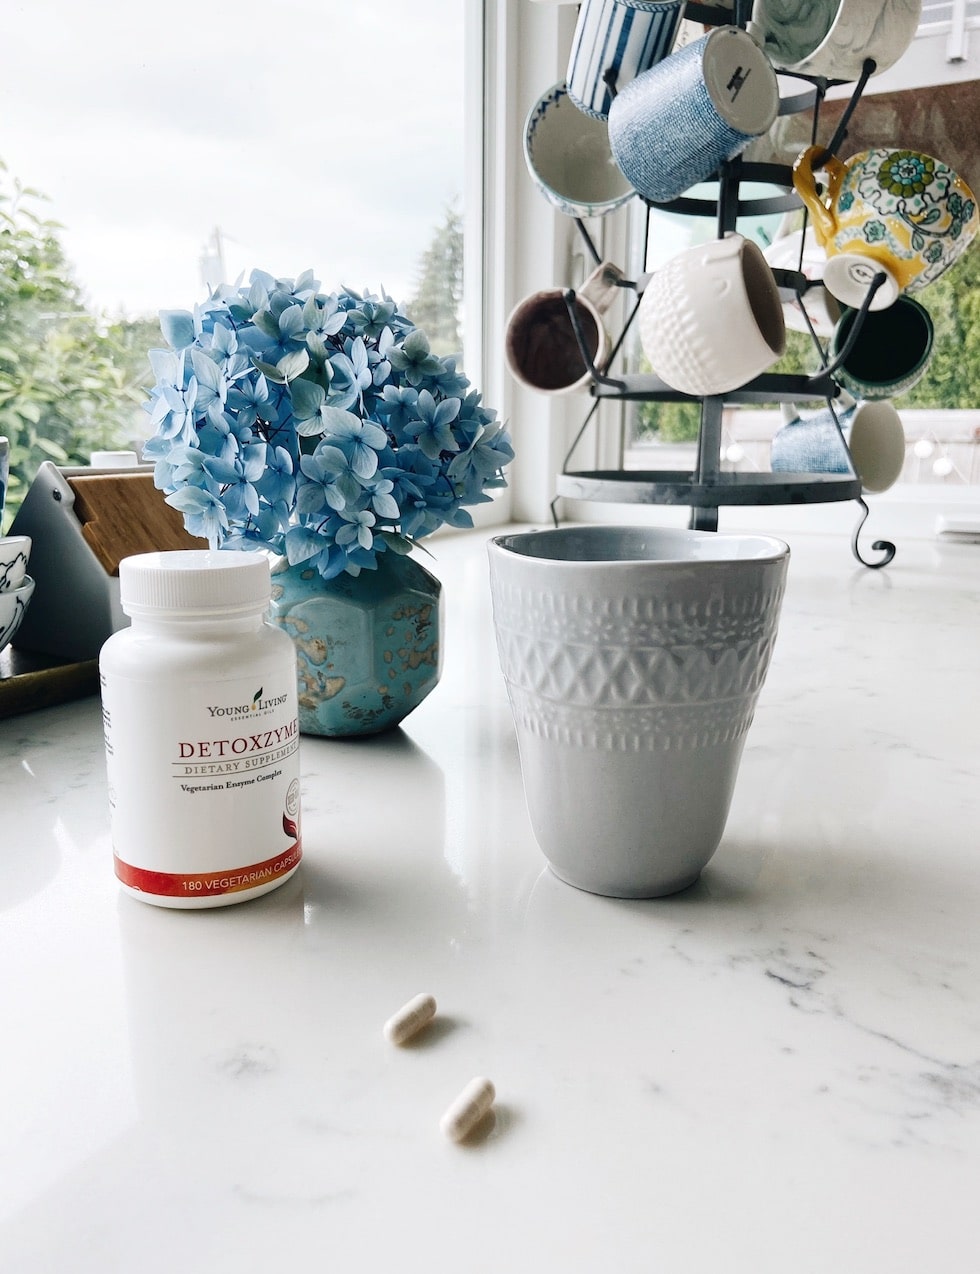 My Top 10 Must-Have Toxin-Free Products From Young Living